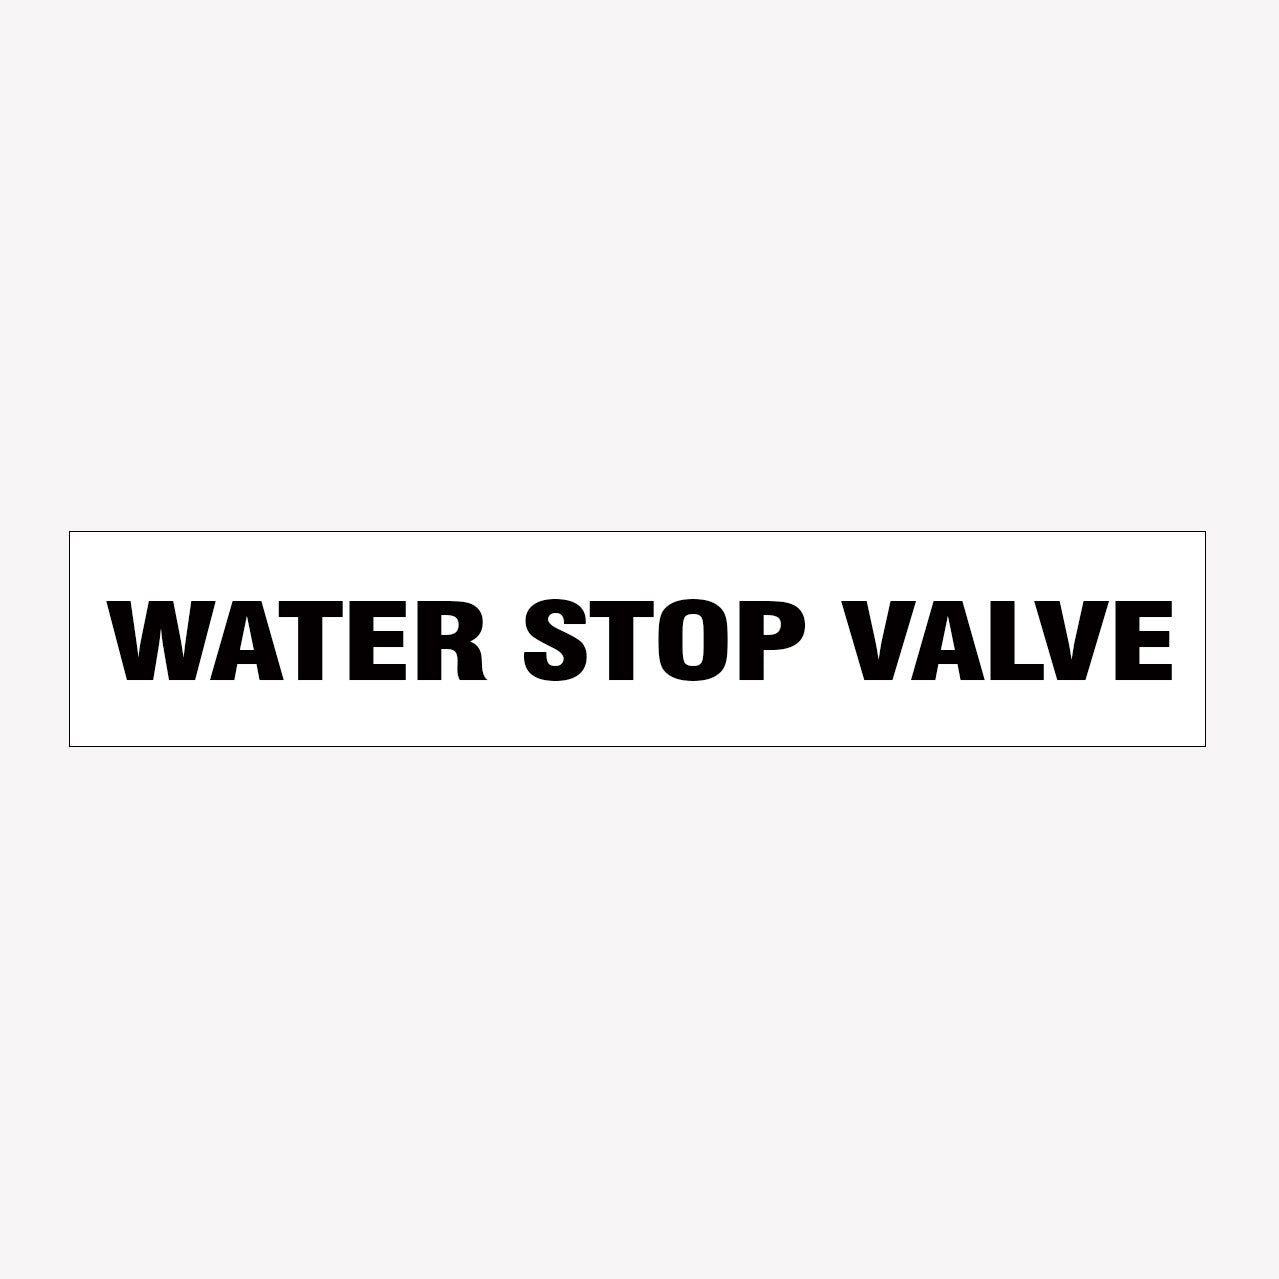 WATER STOP VALVE SIGN